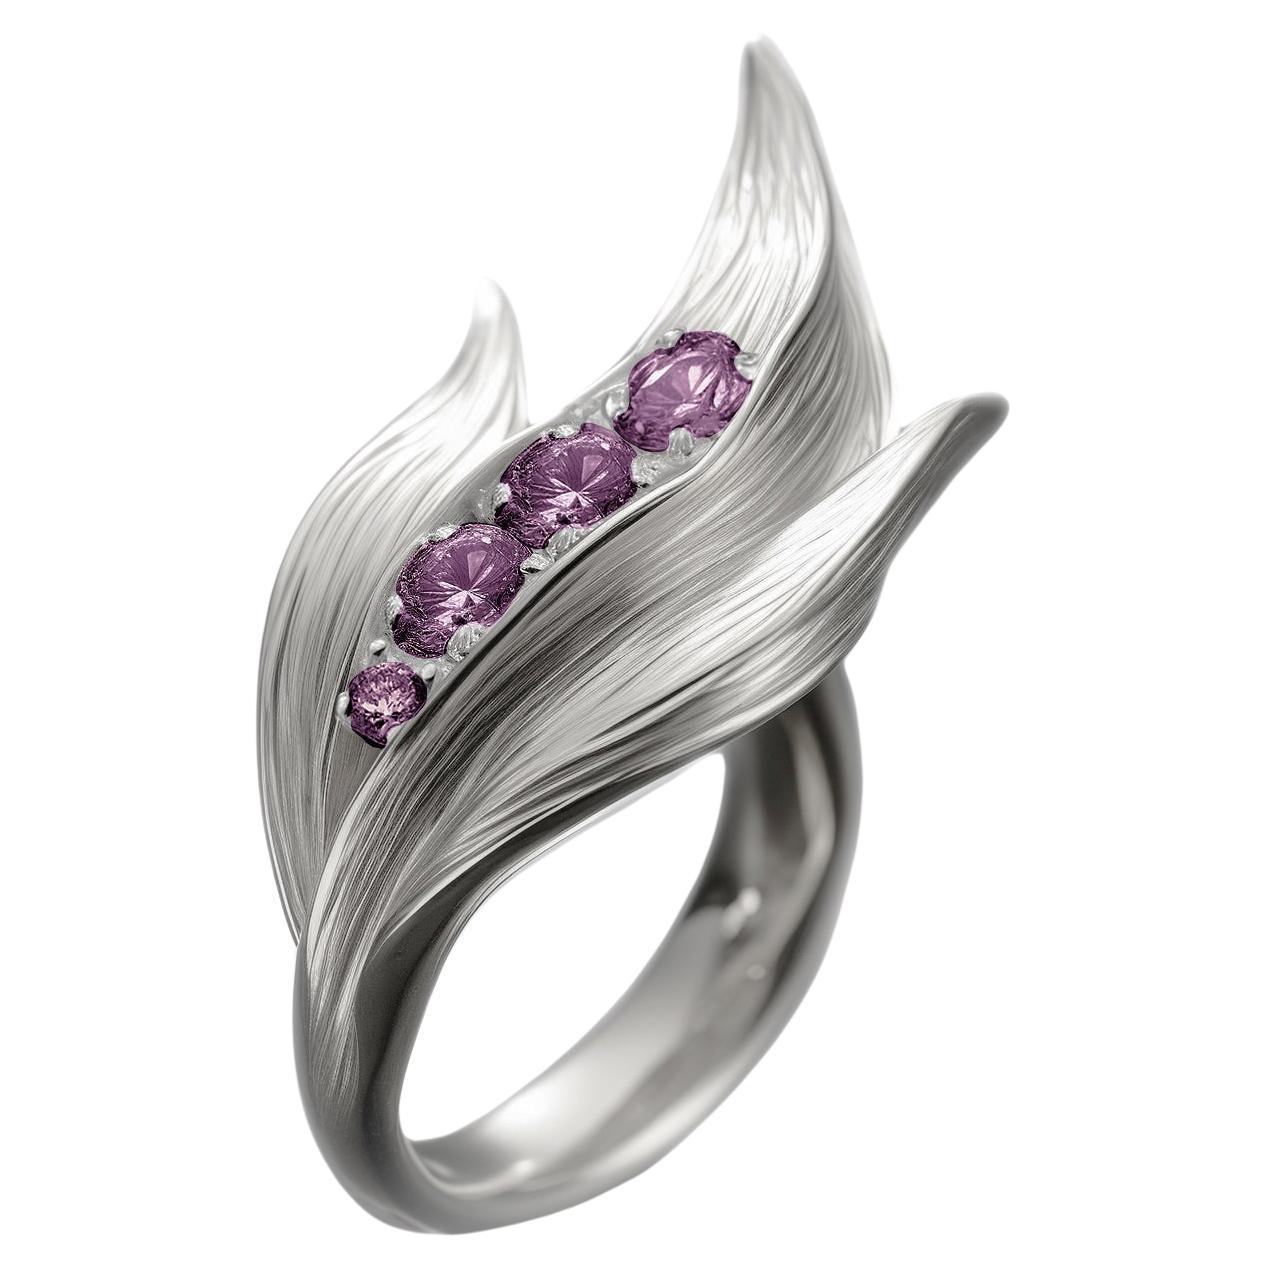 The Contemporary Lily of The Valley Ring with Purple Sapphires (bague muguet contemporaine en or blanc avec saphirs violets)